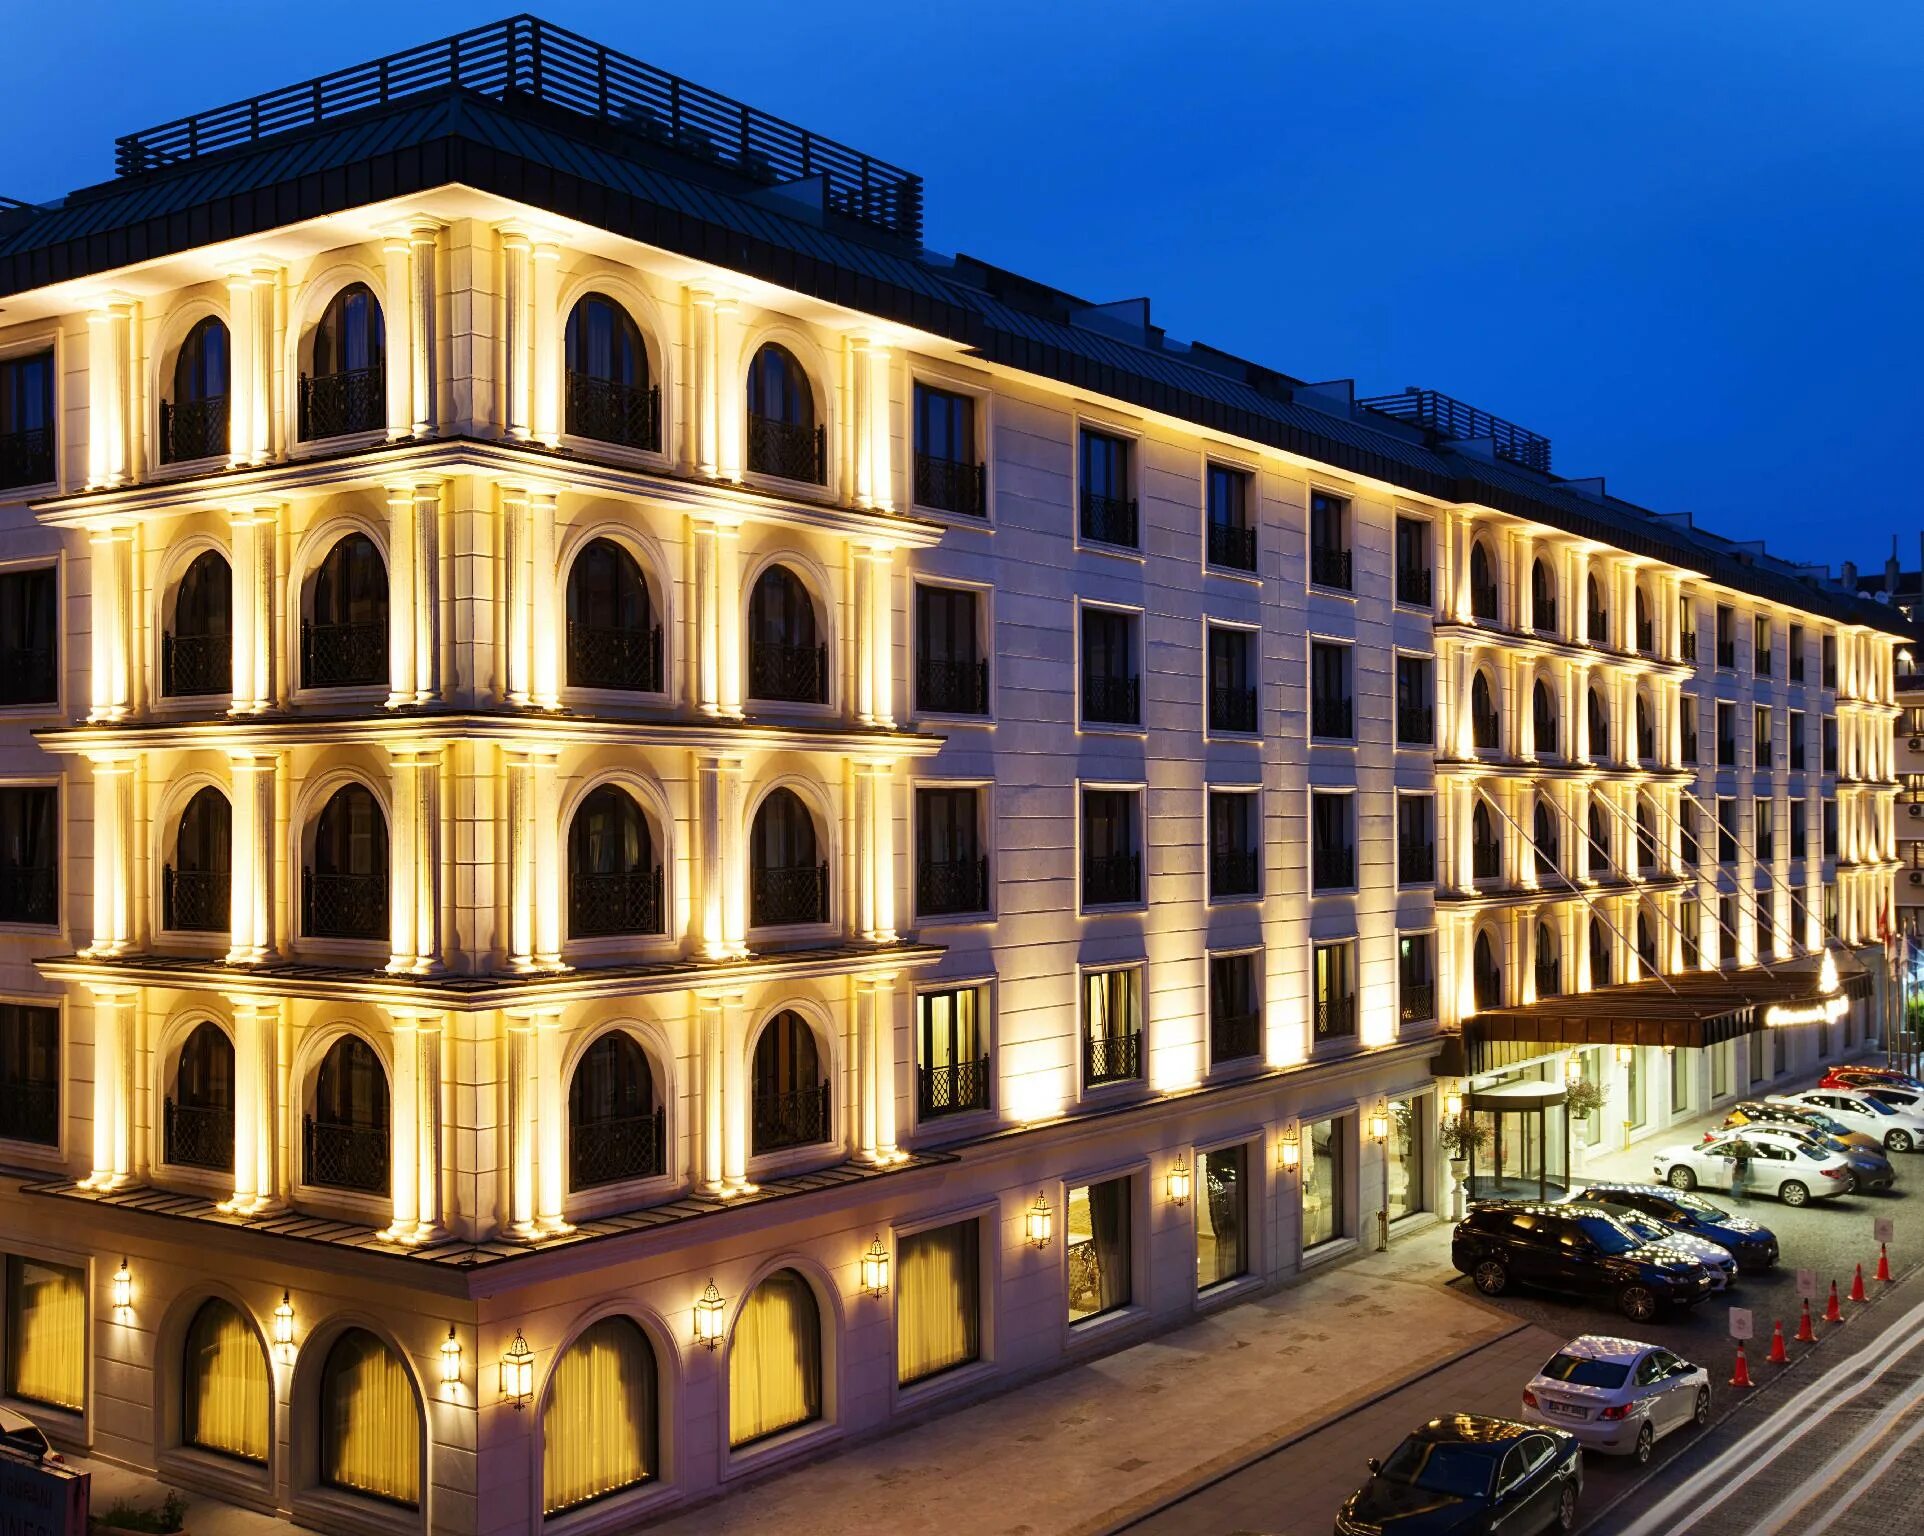 Life hotel стамбул. Ottoman’s Life Hotel Deluxe, Фатих. Ottomans Life Deluxe Hotel 5. Ottoman Hotel Стамбул. Стамбул (Фатих) / Istanbul (Fatih) Dosso Dossi Hotel Spa Downtown 5.